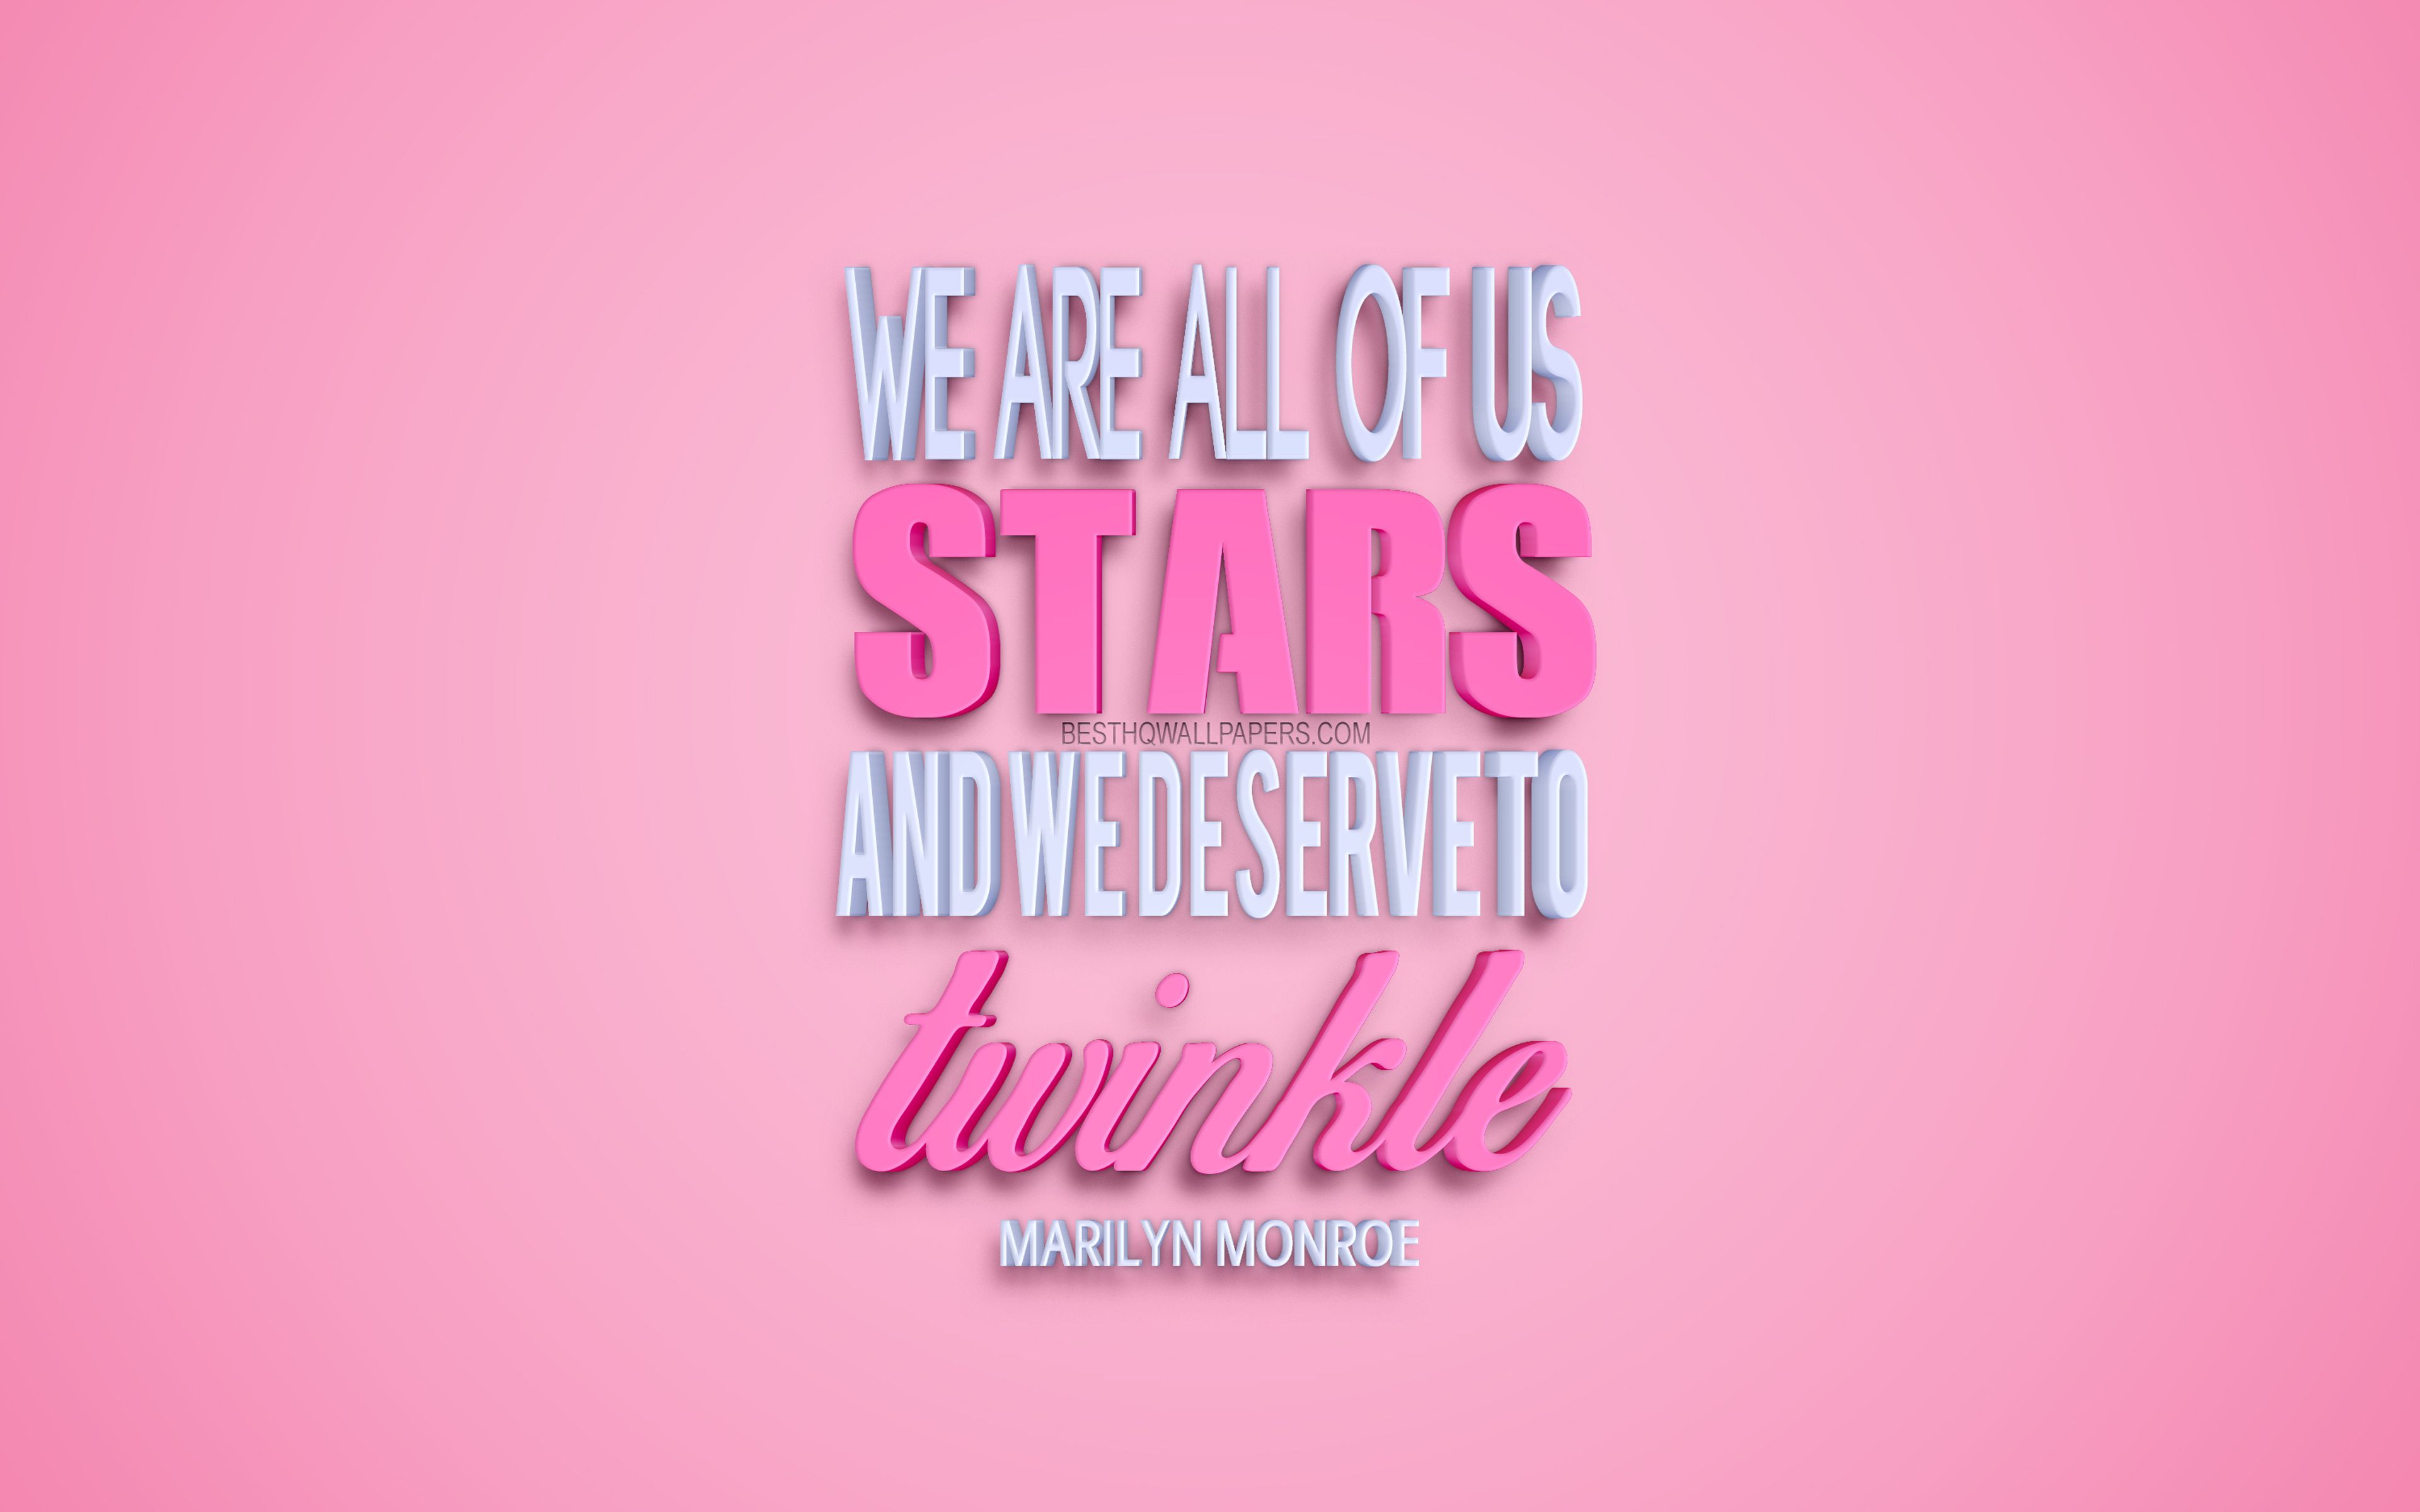 Download wallpaper We are all of us stars and we deserve to twinkle, Marilyn Monroe quotes, quotes about women, inspiration, motivation, quotes for women, 3D art, pink background, creative art, Marilyn Monroe